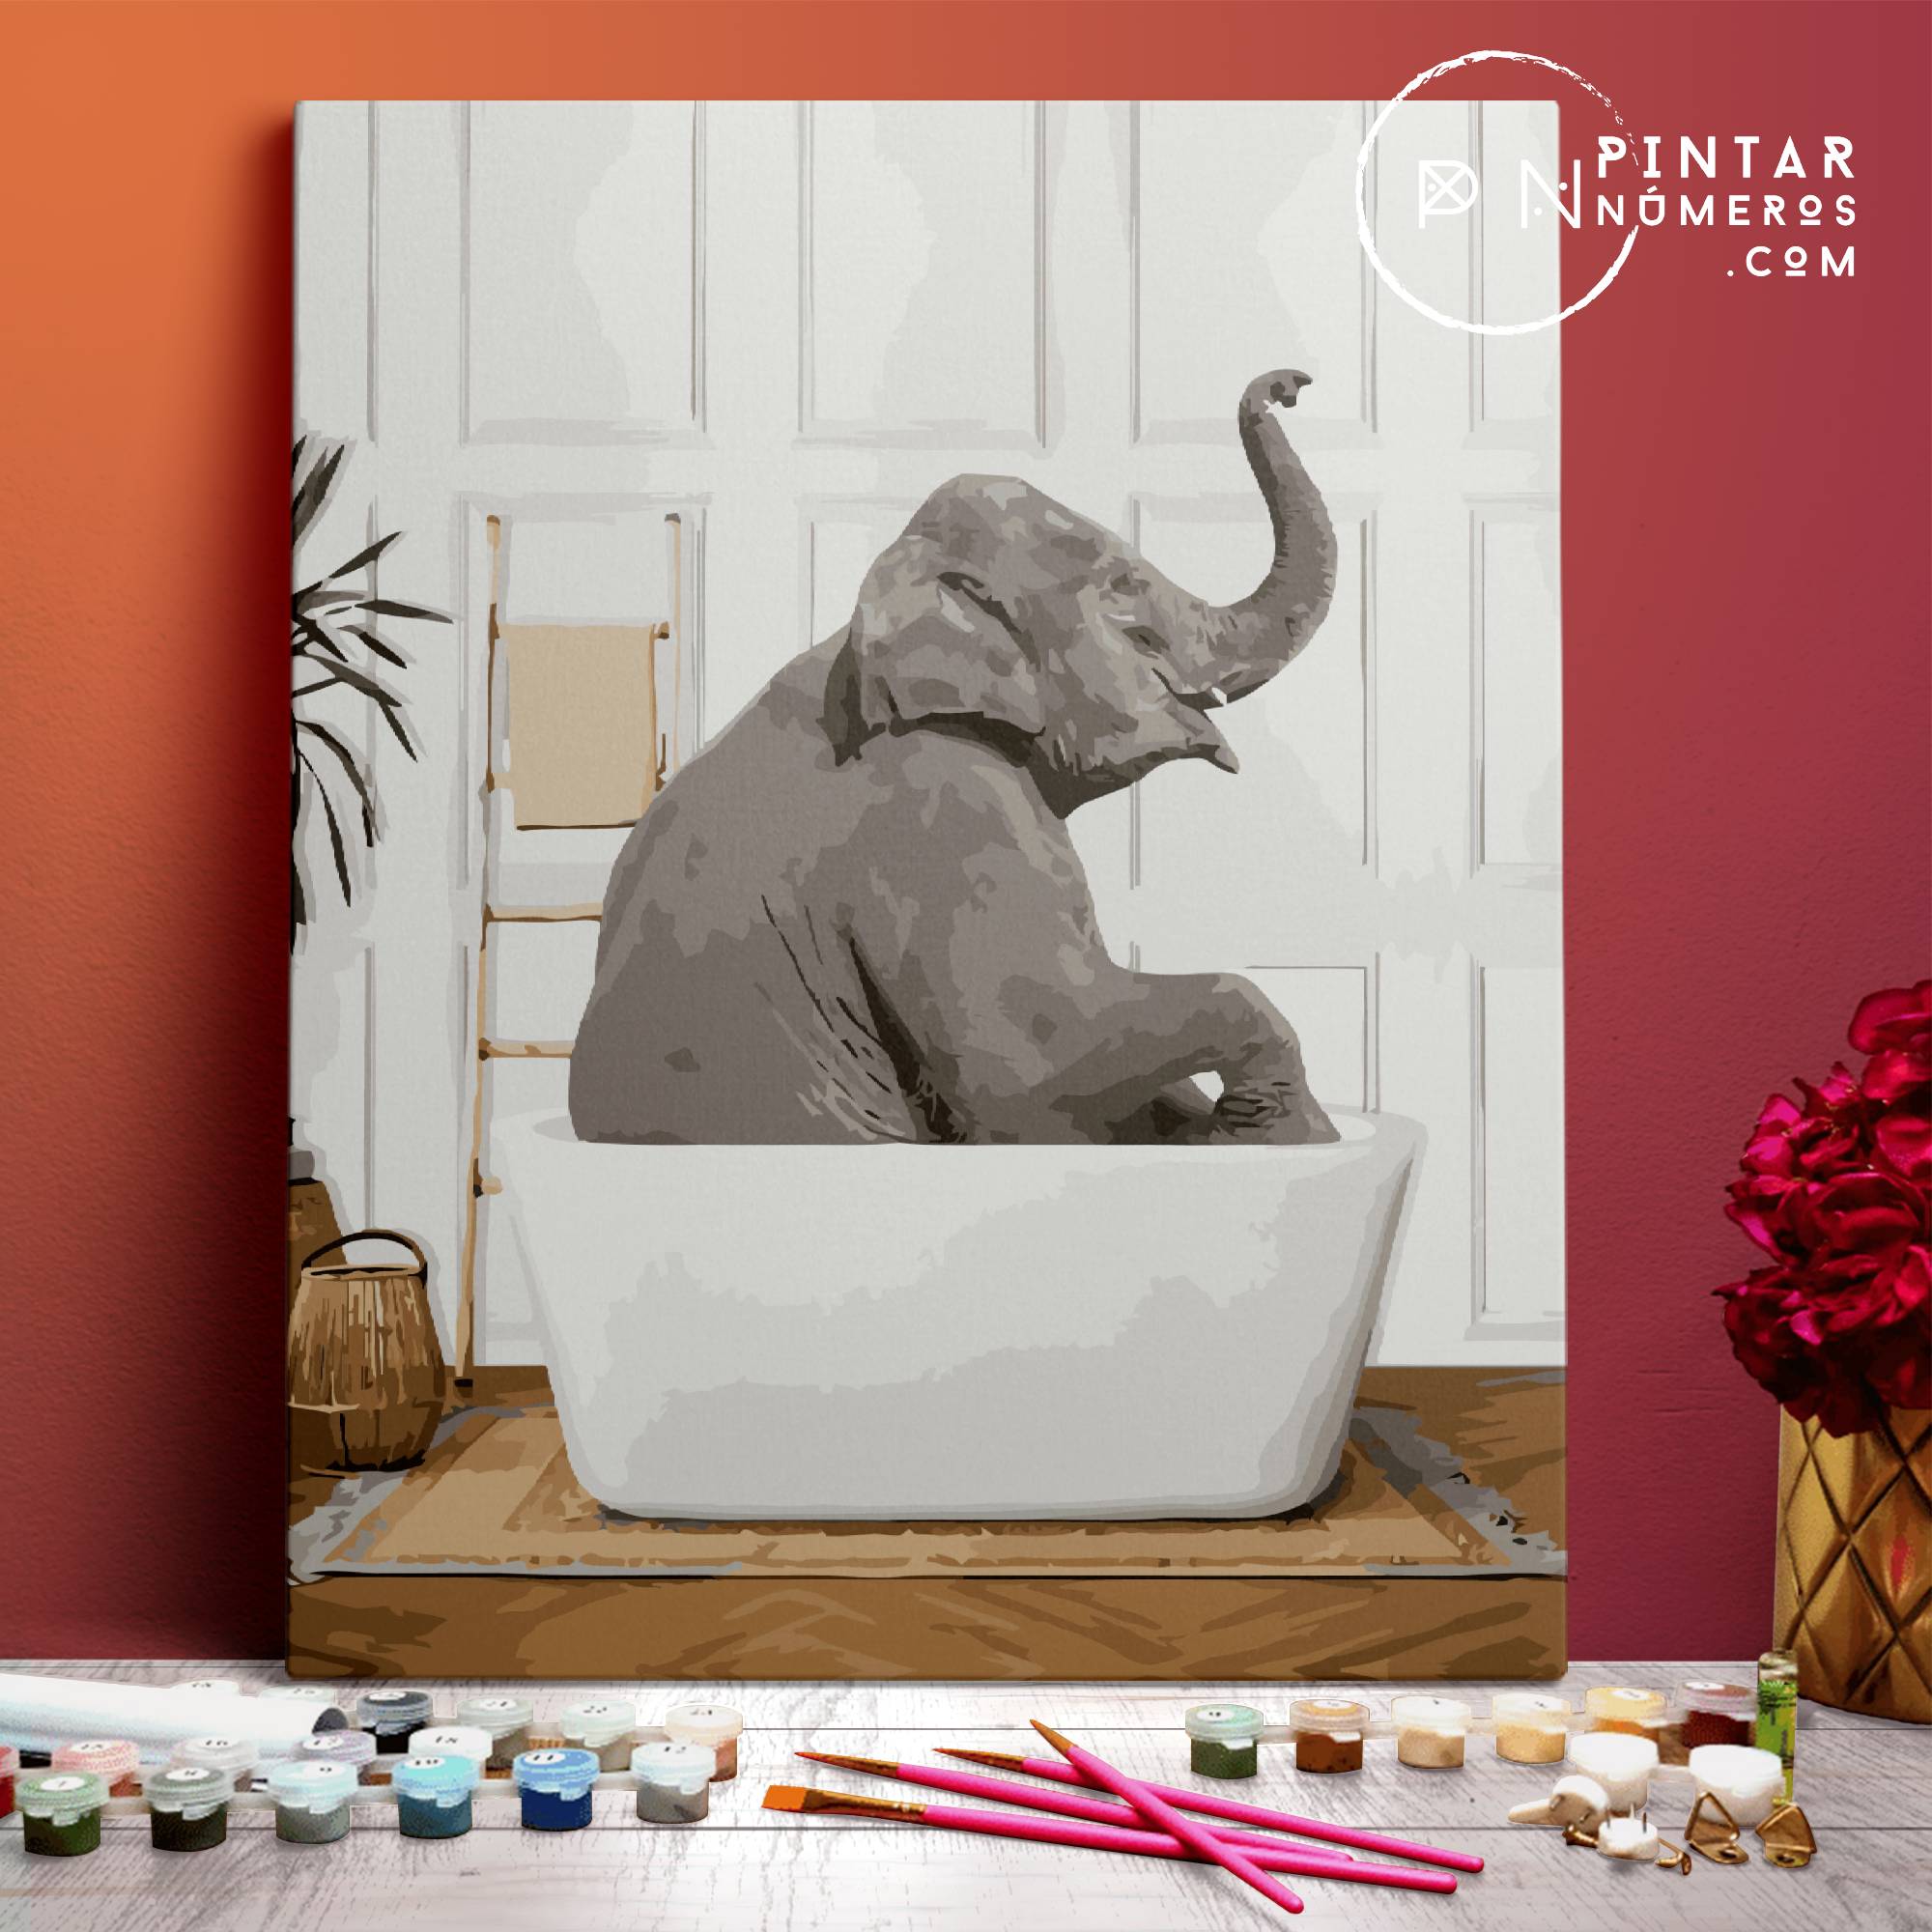 Elephant in the bathtub - Paint by Numbers®